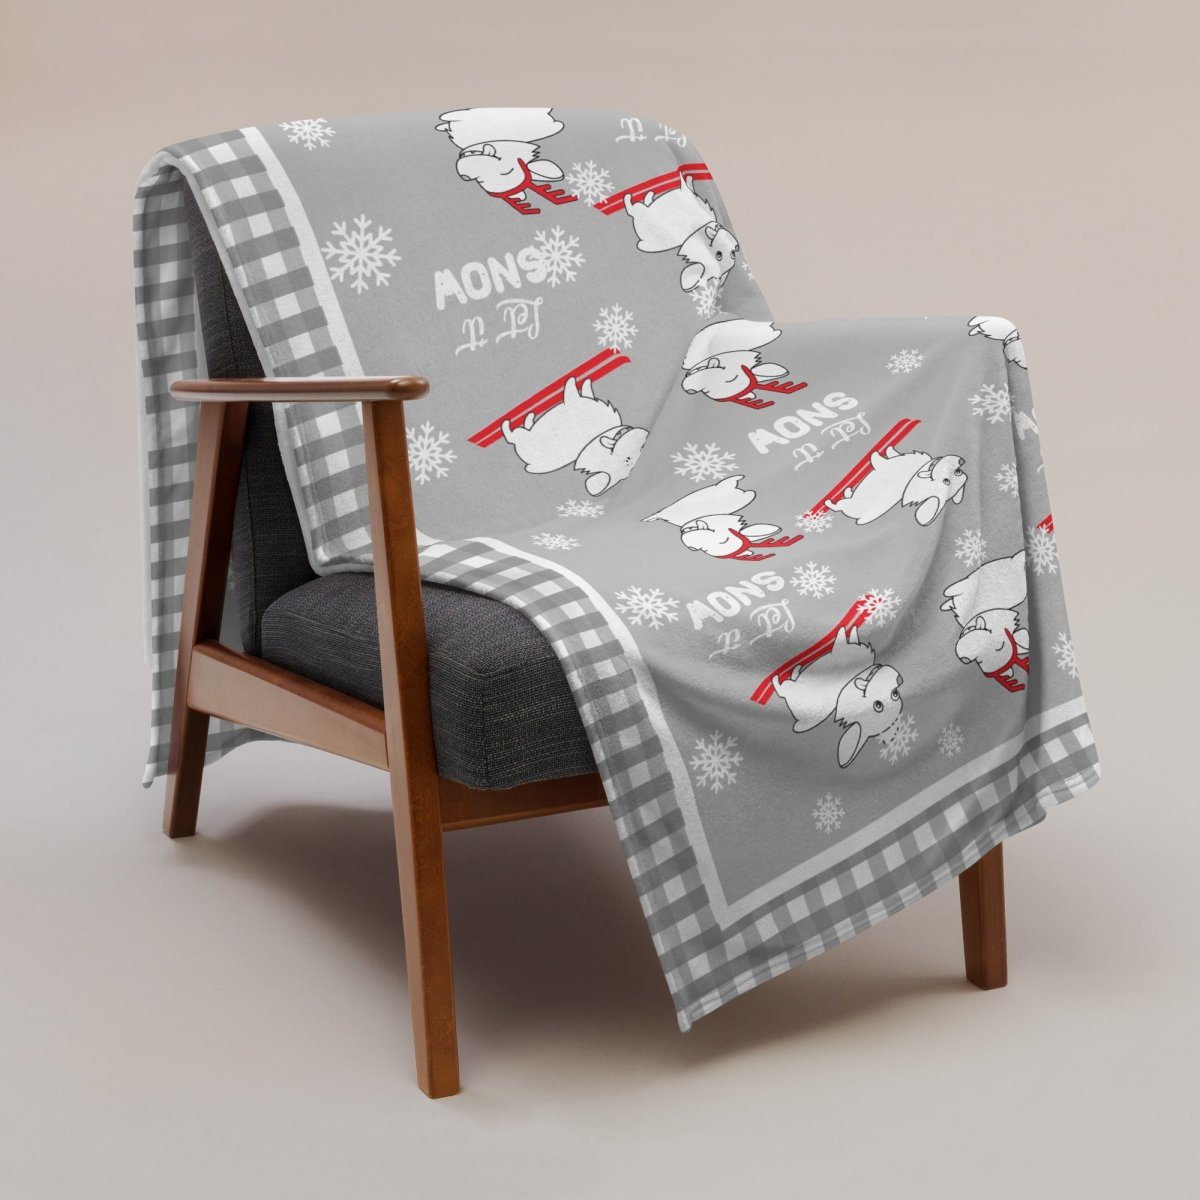 Let It Snow Dogs Throw Blanket - DoggyLoveandMore